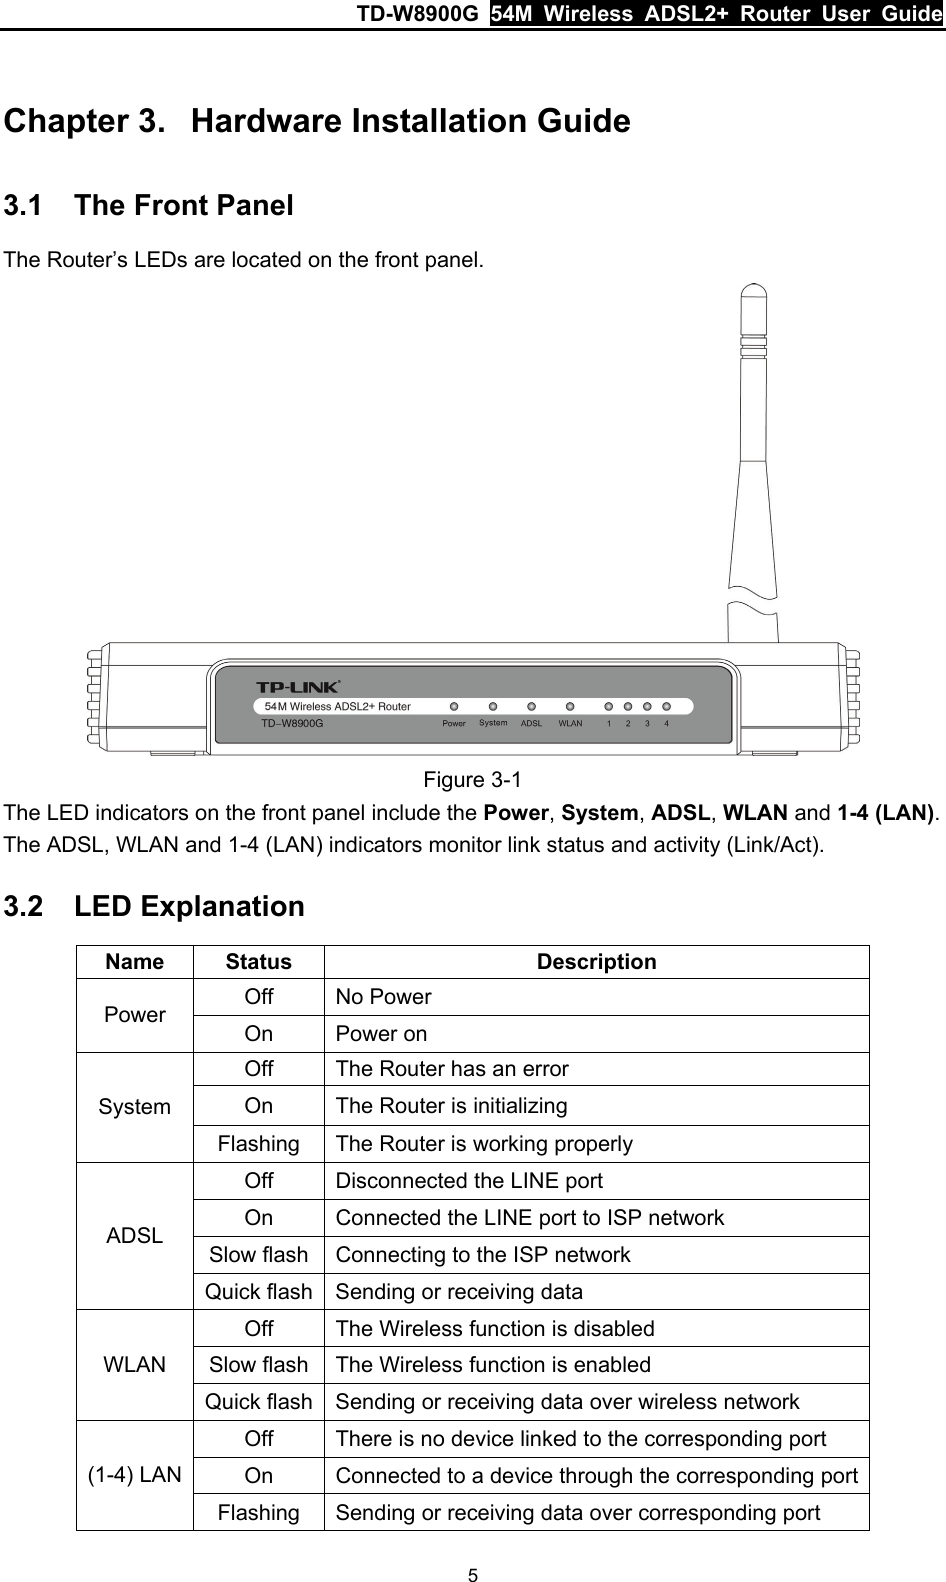 TD-W8900G  54M Wireless ADSL2+ Router User Guide 5  Chapter 3.  Hardware Installation Guide 3.1  The Front Panel The Router’s LEDs are located on the front panel.  Figure 3-1 The LED indicators on the front panel include the Power, System, ADSL, WLAN and 1-4 (LAN). The ADSL, WLAN and 1-4 (LAN) indicators monitor link status and activity (Link/Act). 3.2  LED Explanation Name Status  Description Off No Power Power  On Power on Off  The Router has an error On  The Router is initializing System Flashing  The Router is working properly Off  Disconnected the LINE port On    Connected the LINE port to ISP network   Slow flash  Connecting to the ISP network ADSL Quick flash  Sending or receiving data Off  The Wireless function is disabled Slow flash  The Wireless function is enabled WLAN Quick flash  Sending or receiving data over wireless network Off  There is no device linked to the corresponding port On  Connected to a device through the corresponding port (1-4) LAN Flashing  Sending or receiving data over corresponding port 